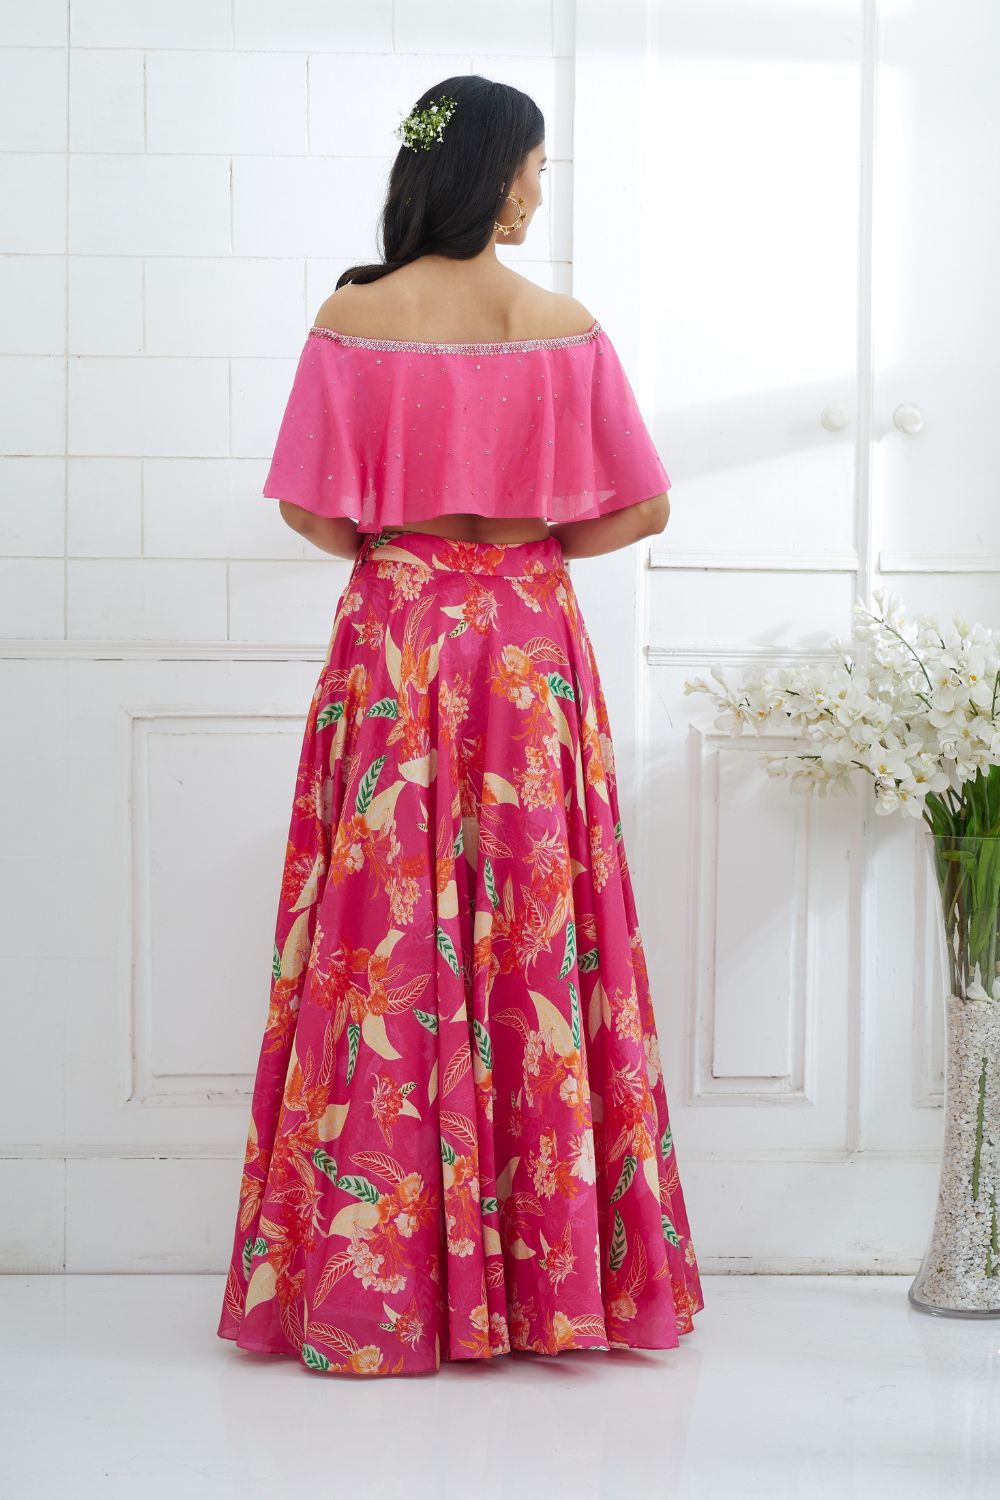 Fuchsia Off-shoulder Embroidered  Blouse With Printed Lehenga